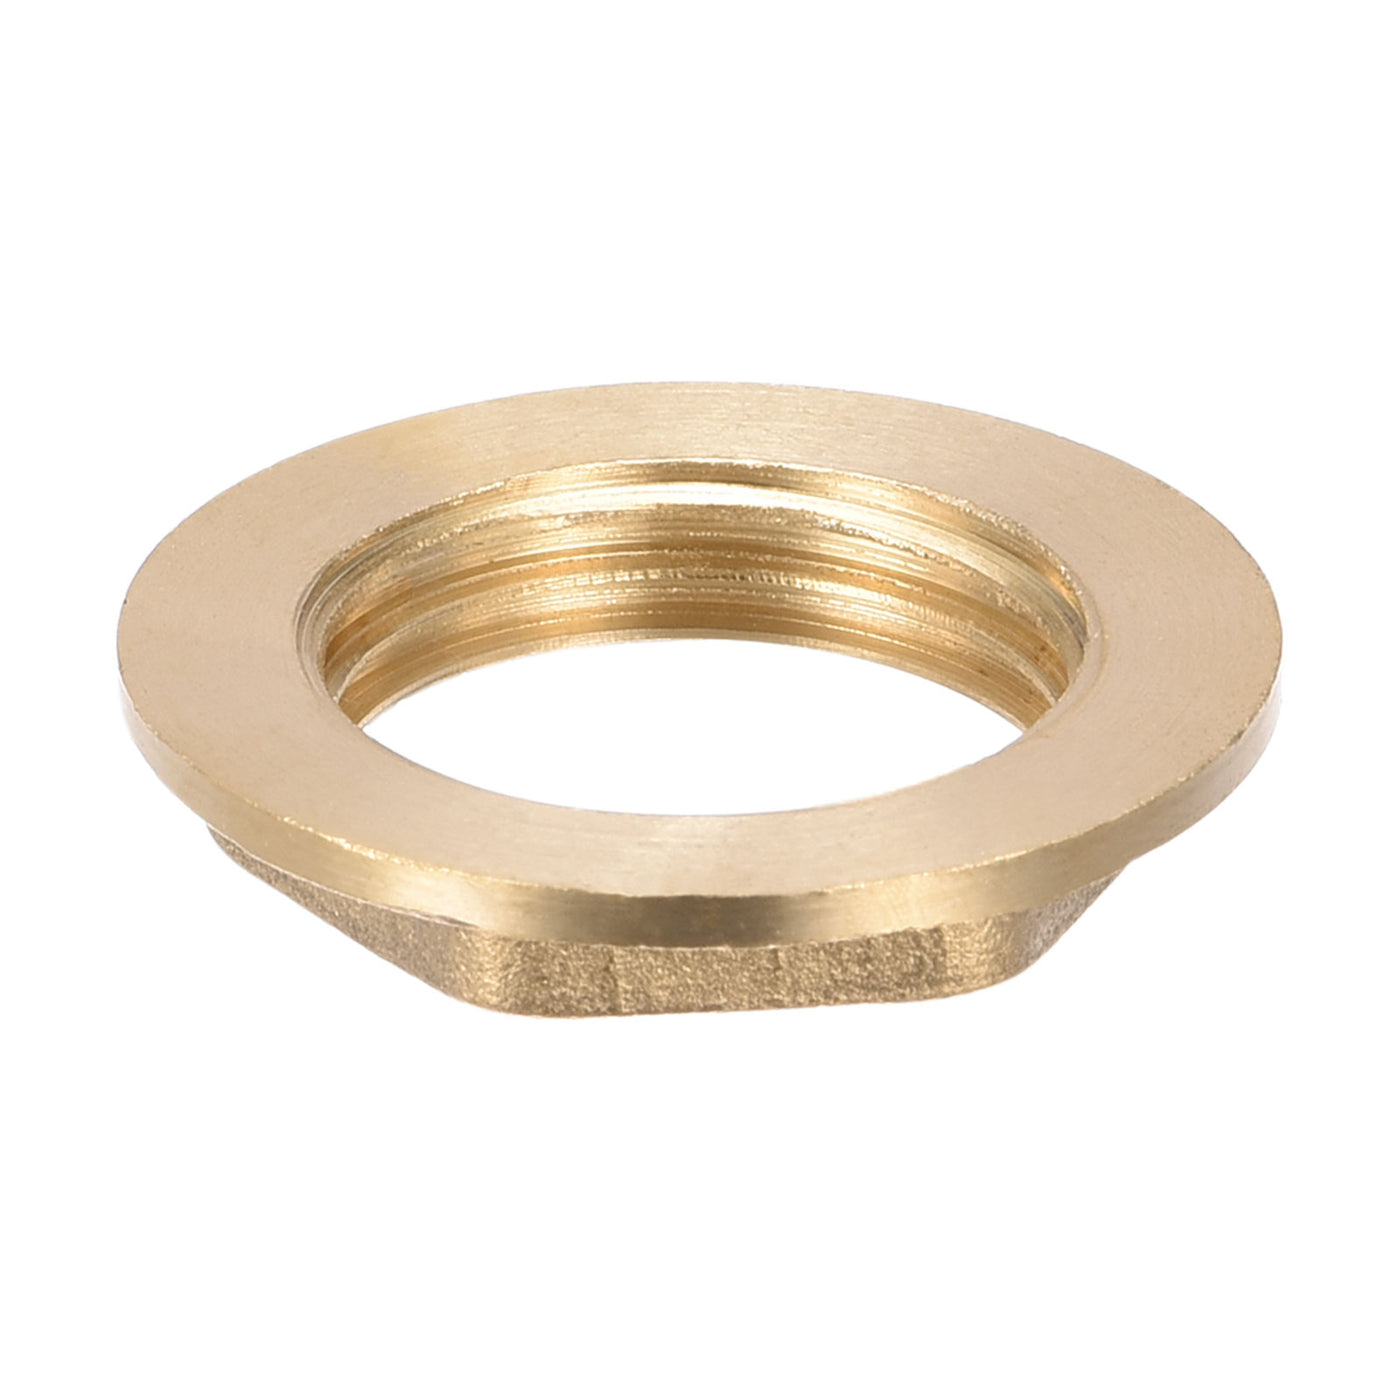 uxcell Uxcell Lock Nut with Flange, Hex Brass Female Locknut for Plumbing